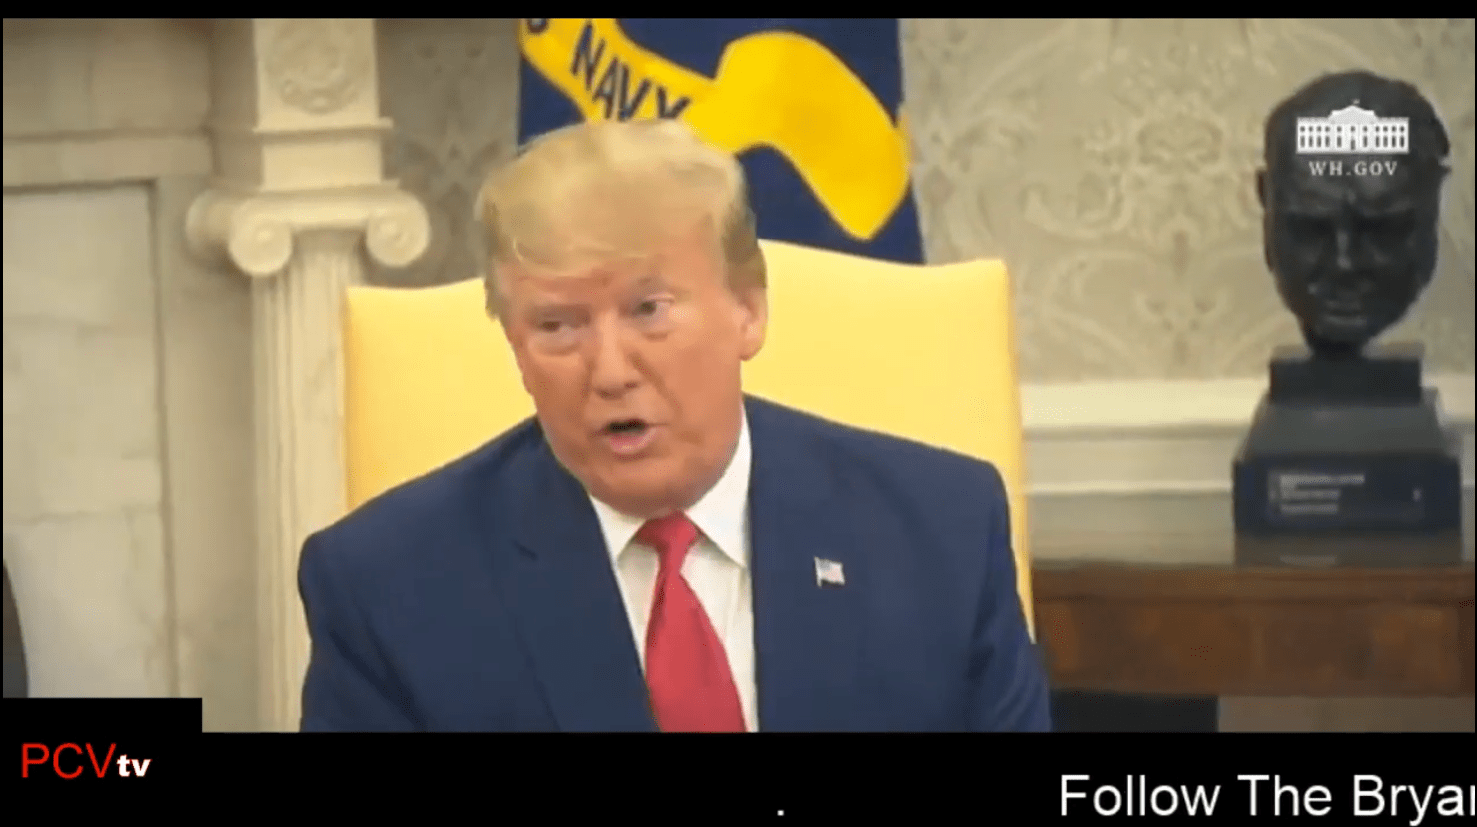 Trump Claims He Hasn't Spoke To Epstein In 15 Years! PCVtv | Preserve Conservative Values